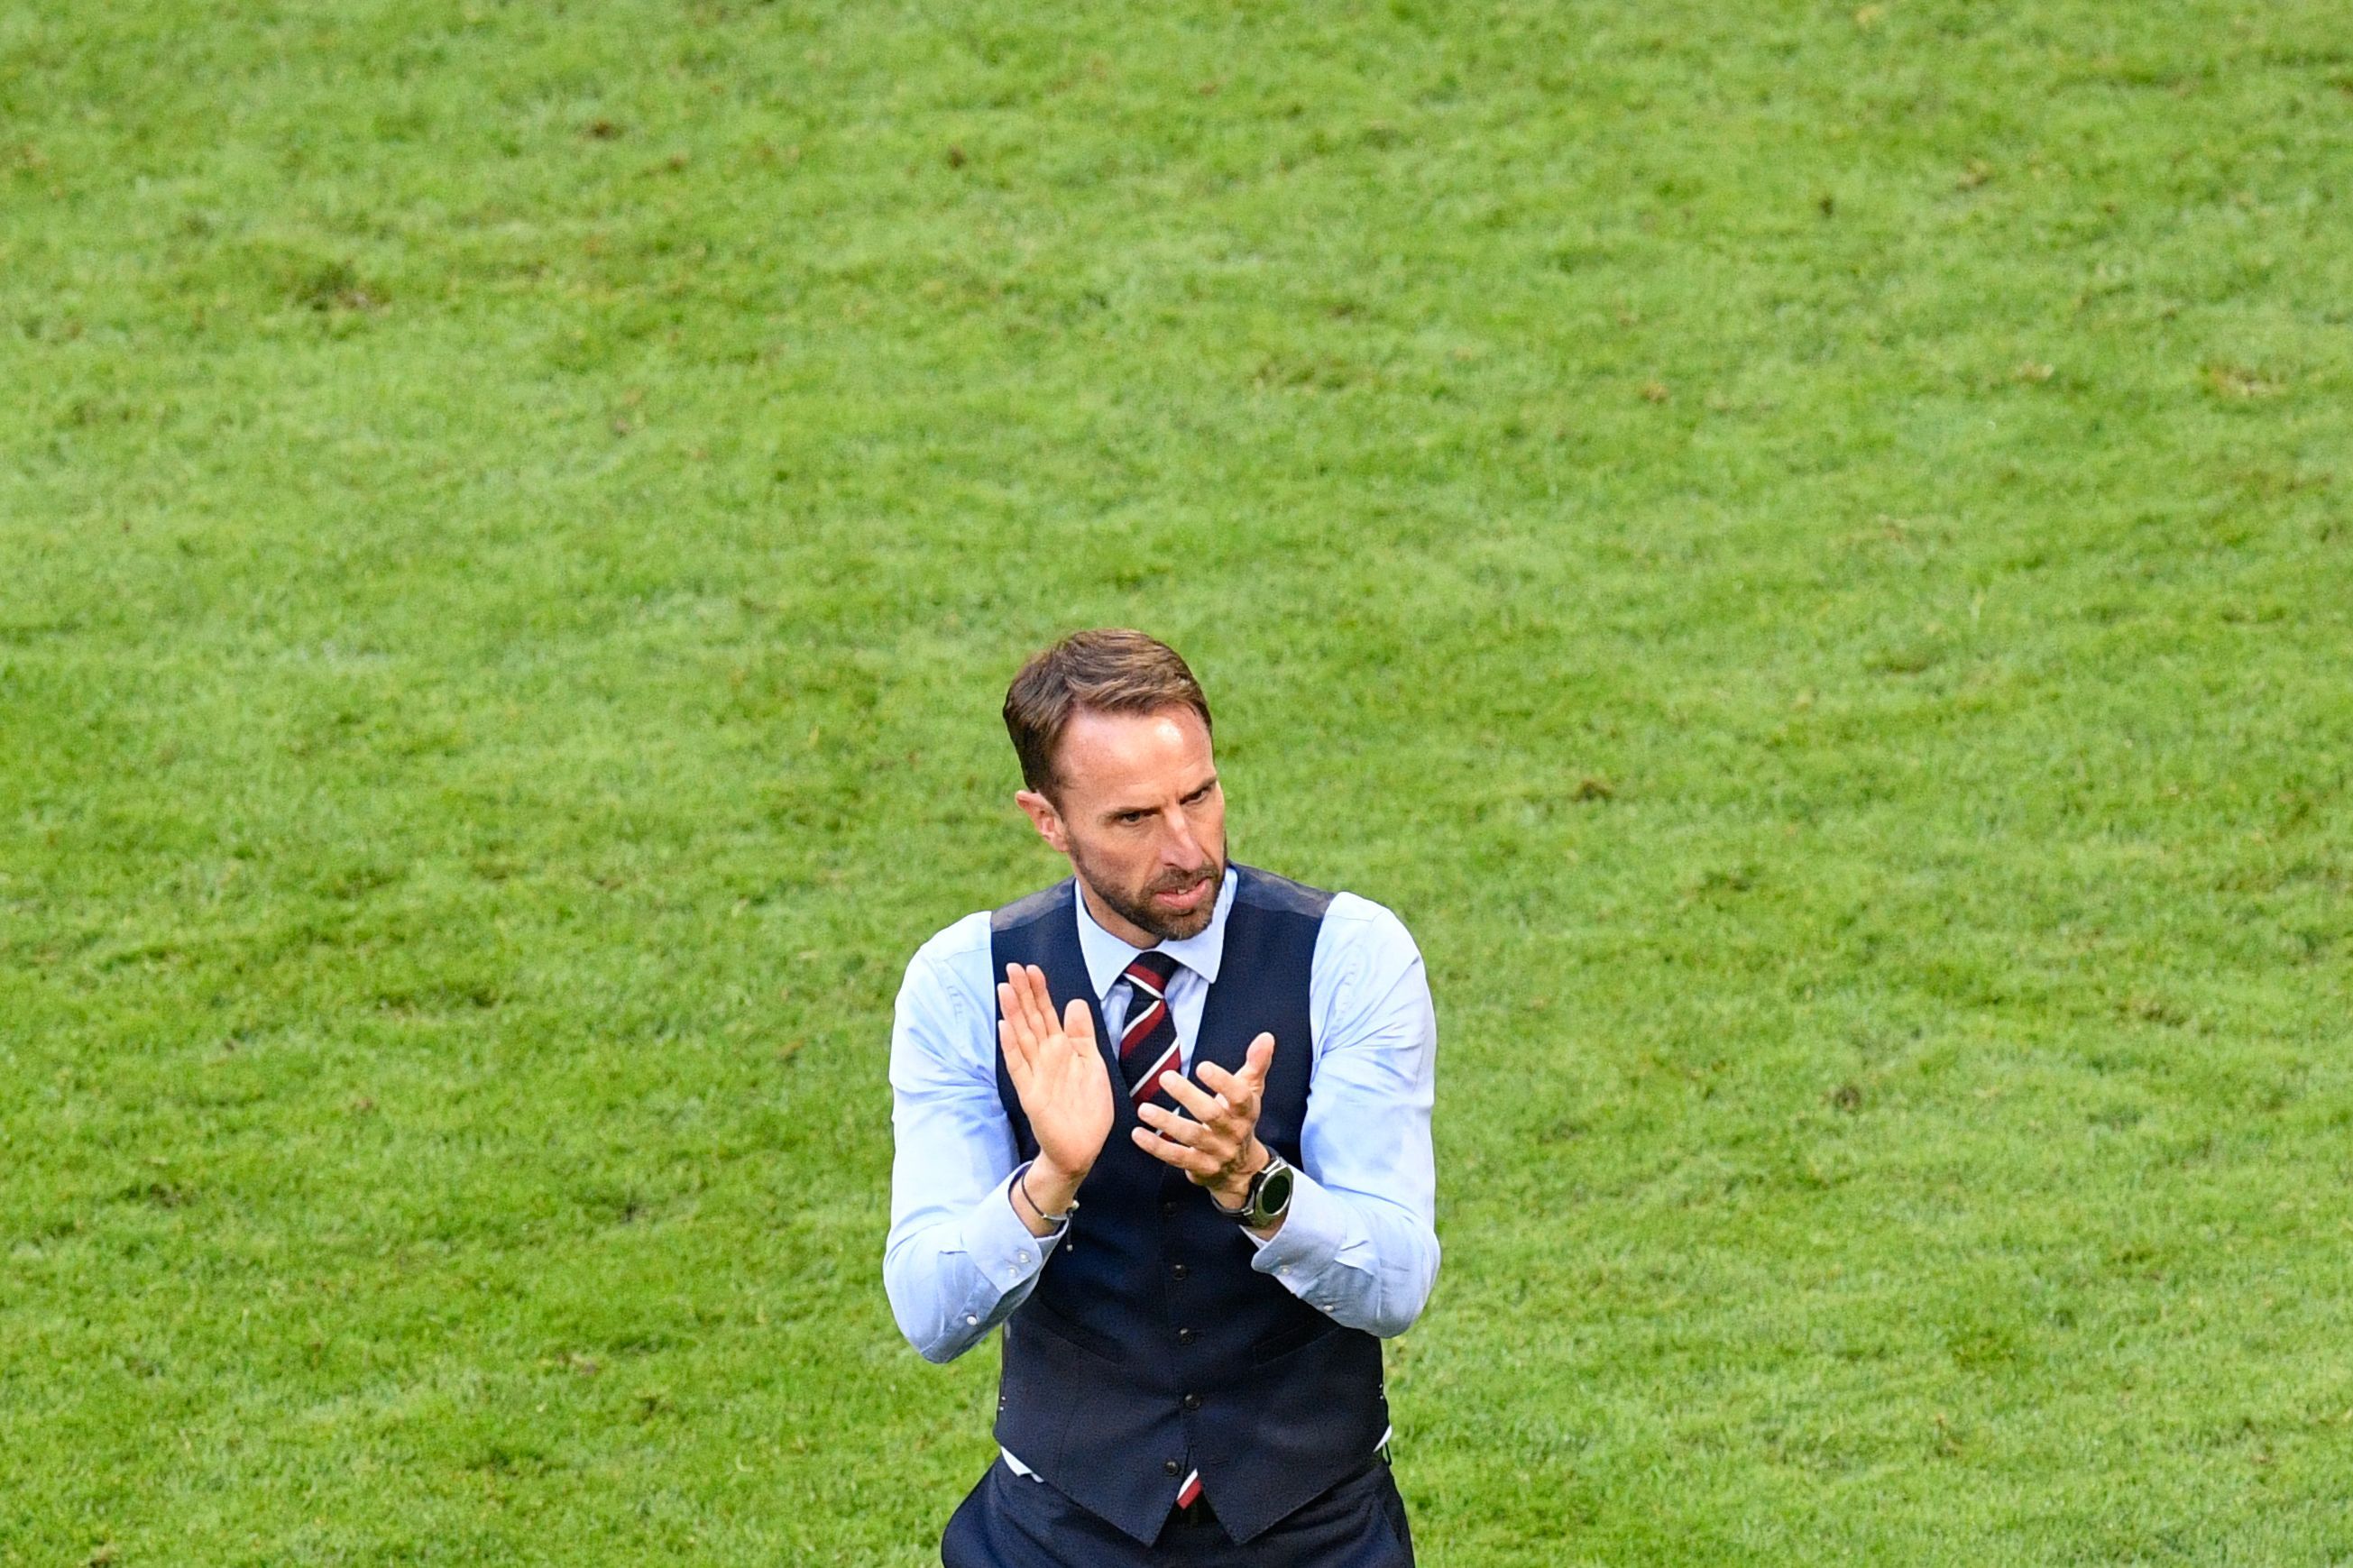 FIFA Rankings: Gareth Southgate, the unlikely hero of England's success